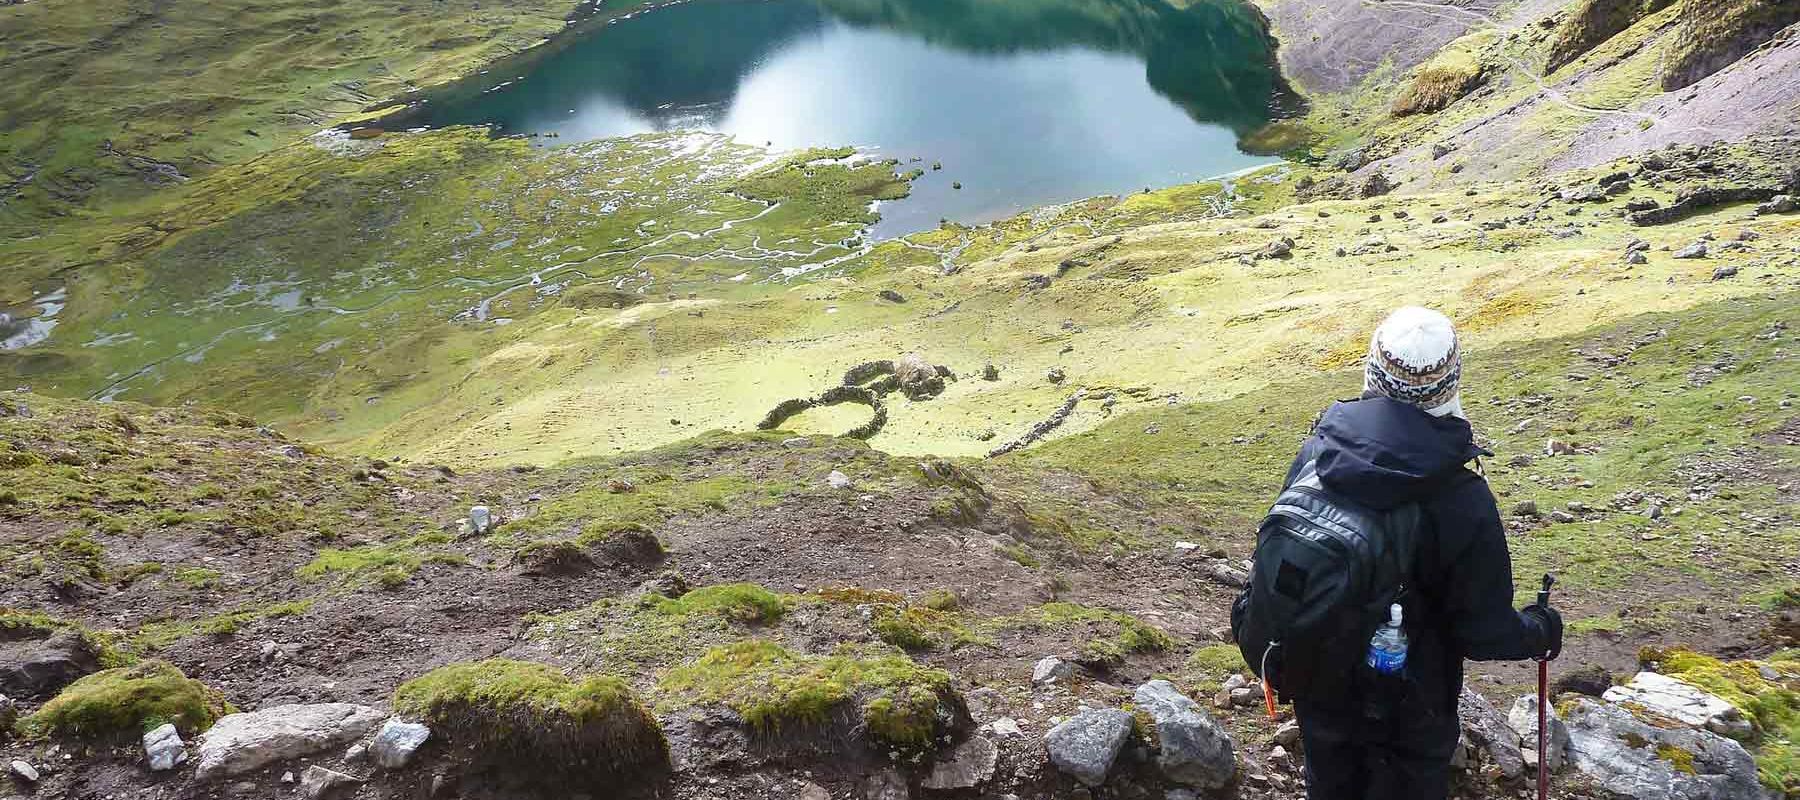 Hiking the dirt path of the Lares Trail Peru